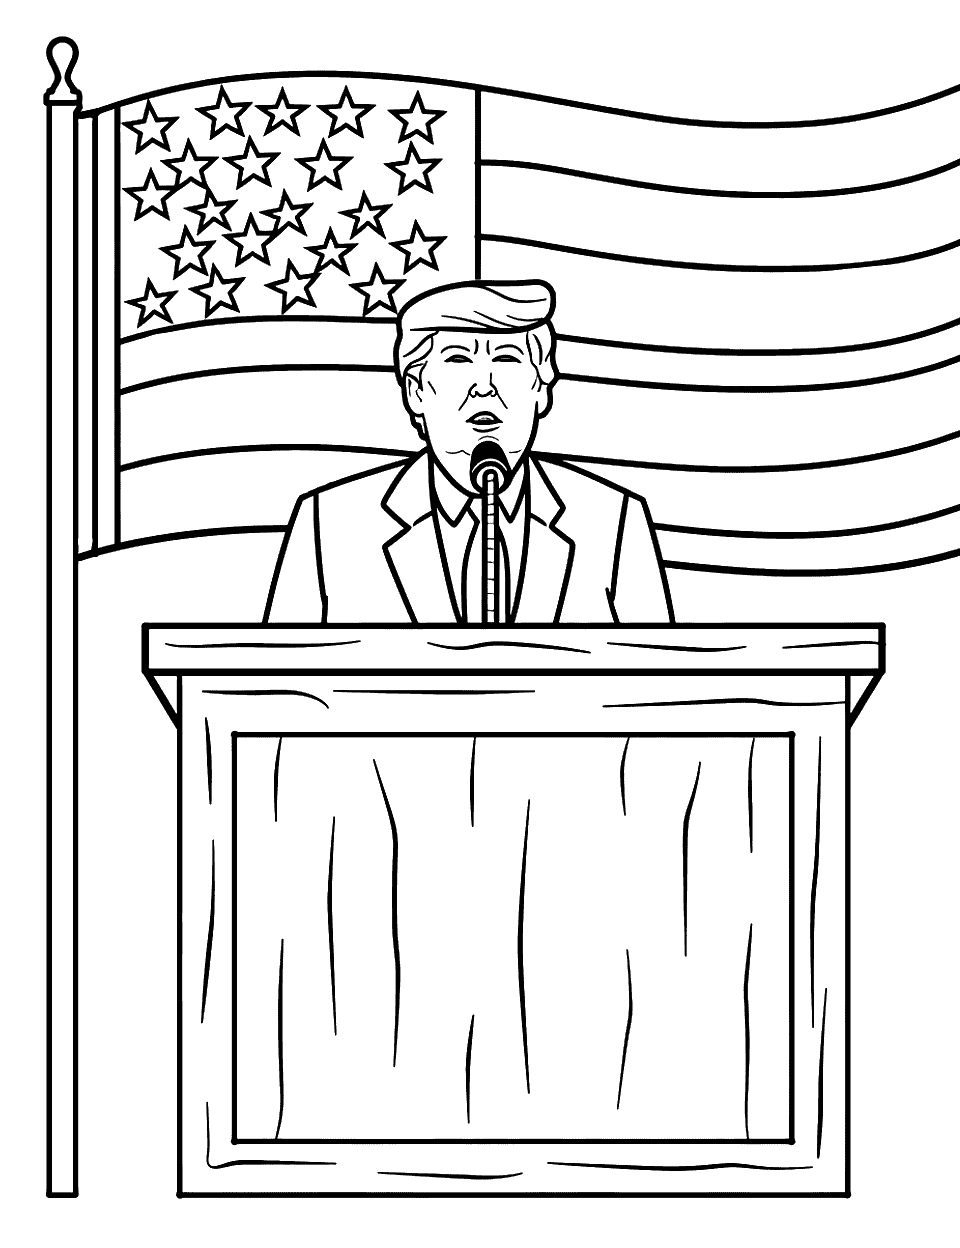 President Giving a Speech American Flag Coloring Page - A president standing at a podium with the American flag behind him.